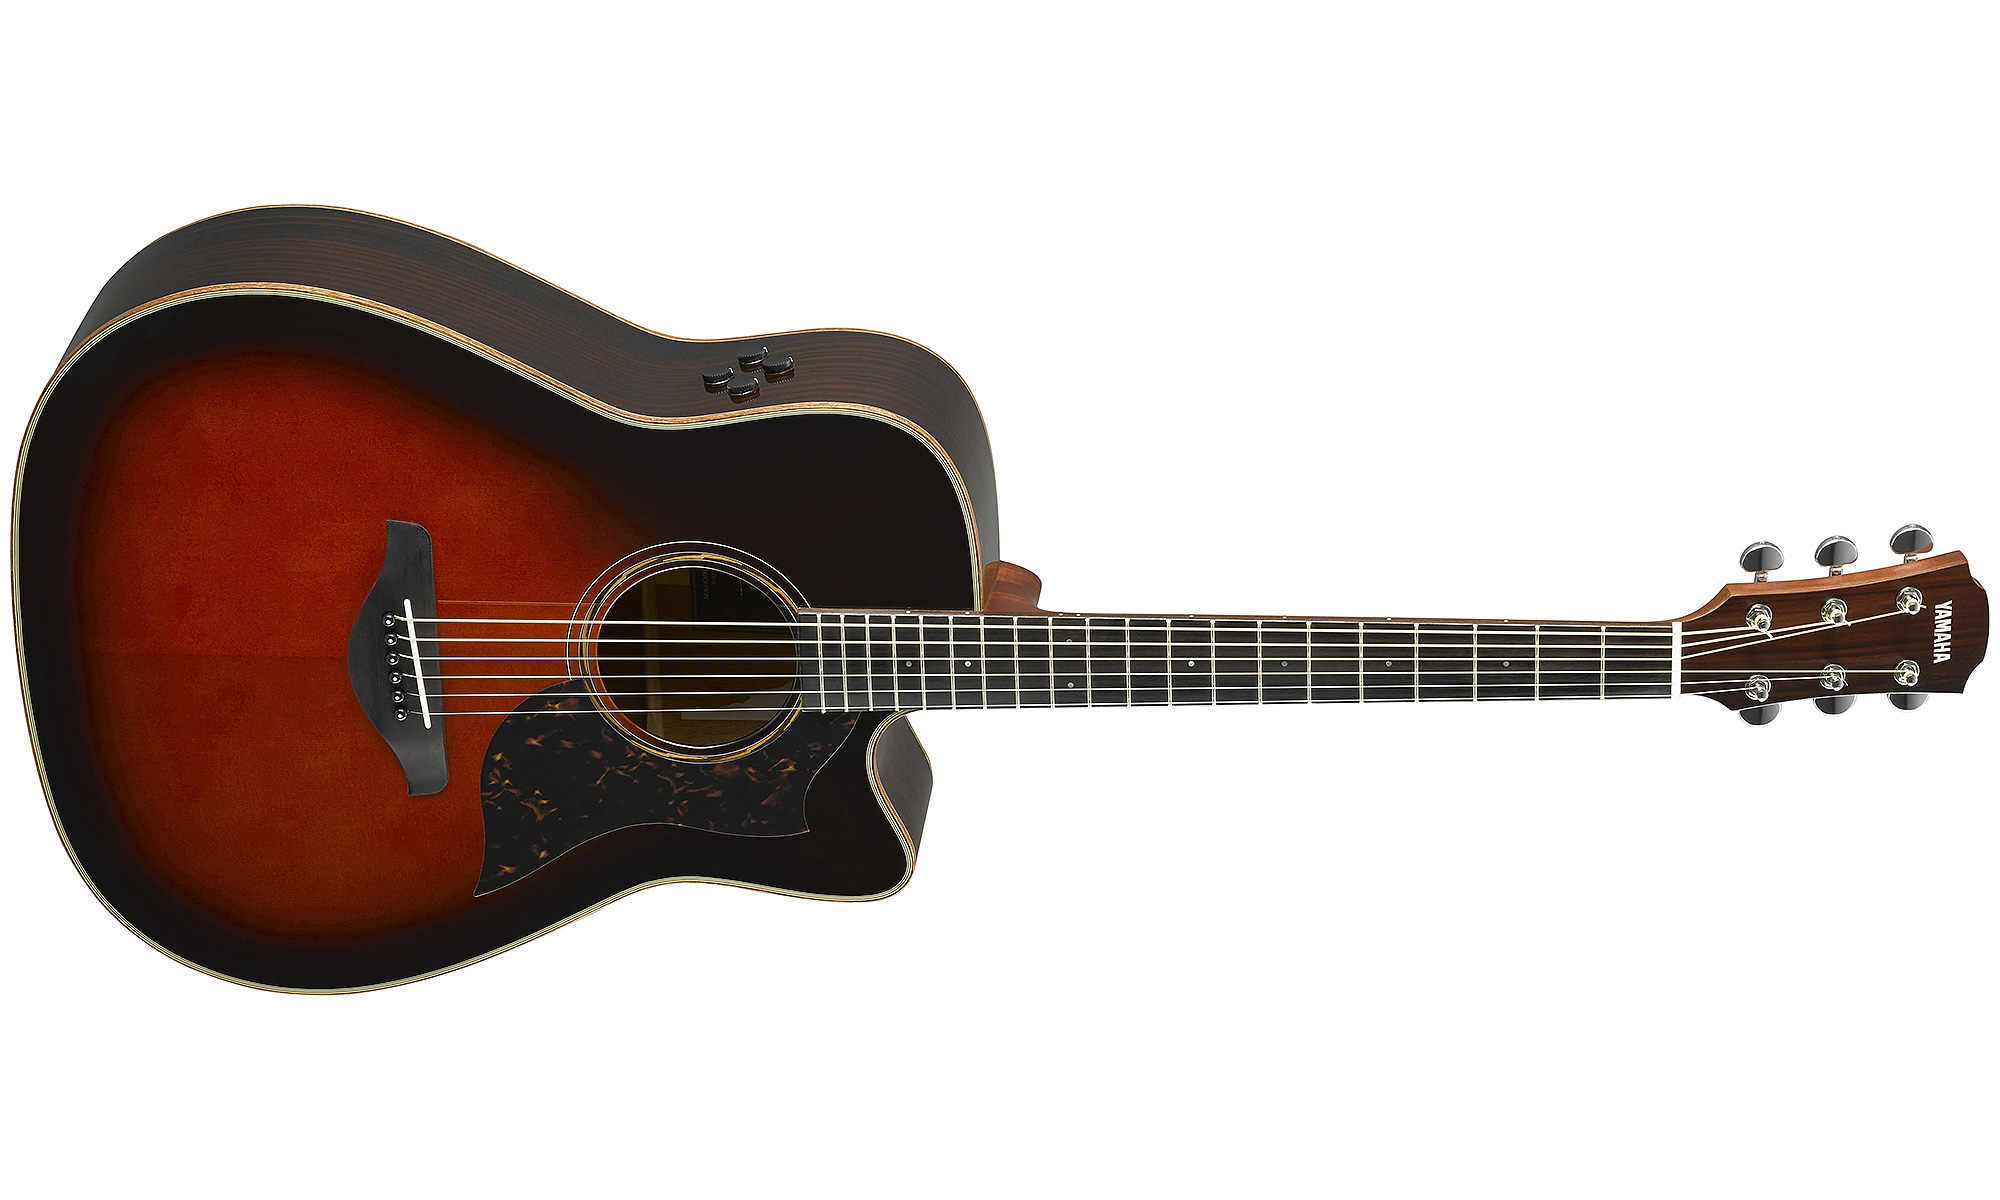 Yamaha A3r Are Tbs Dreadnought Cw Epicea Palissandre 2017 - Tobacco Brown Sunburst - Guitarra electro acustica - Variation 1